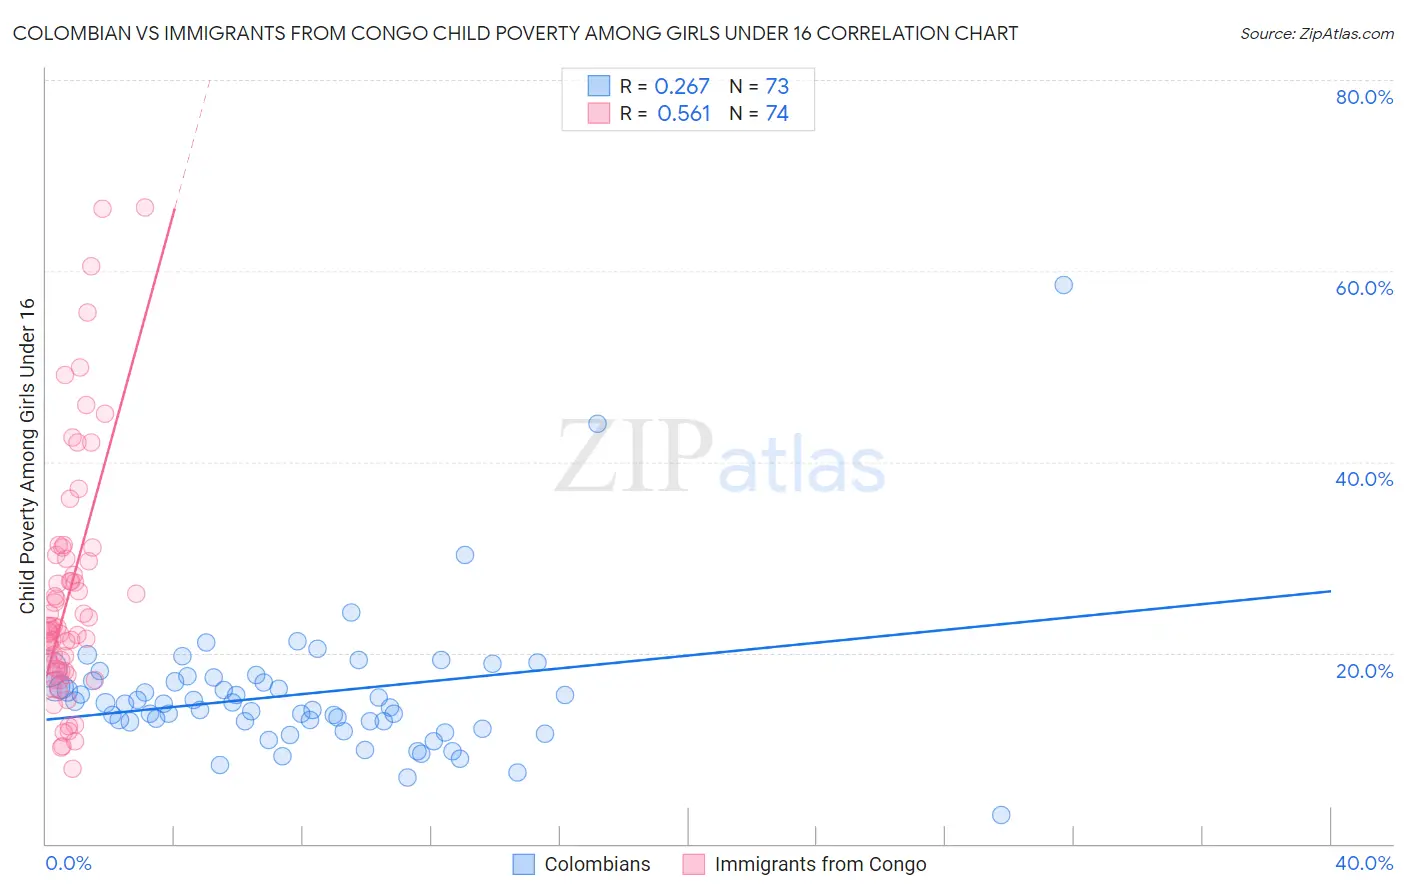 Colombian vs Immigrants from Congo Child Poverty Among Girls Under 16